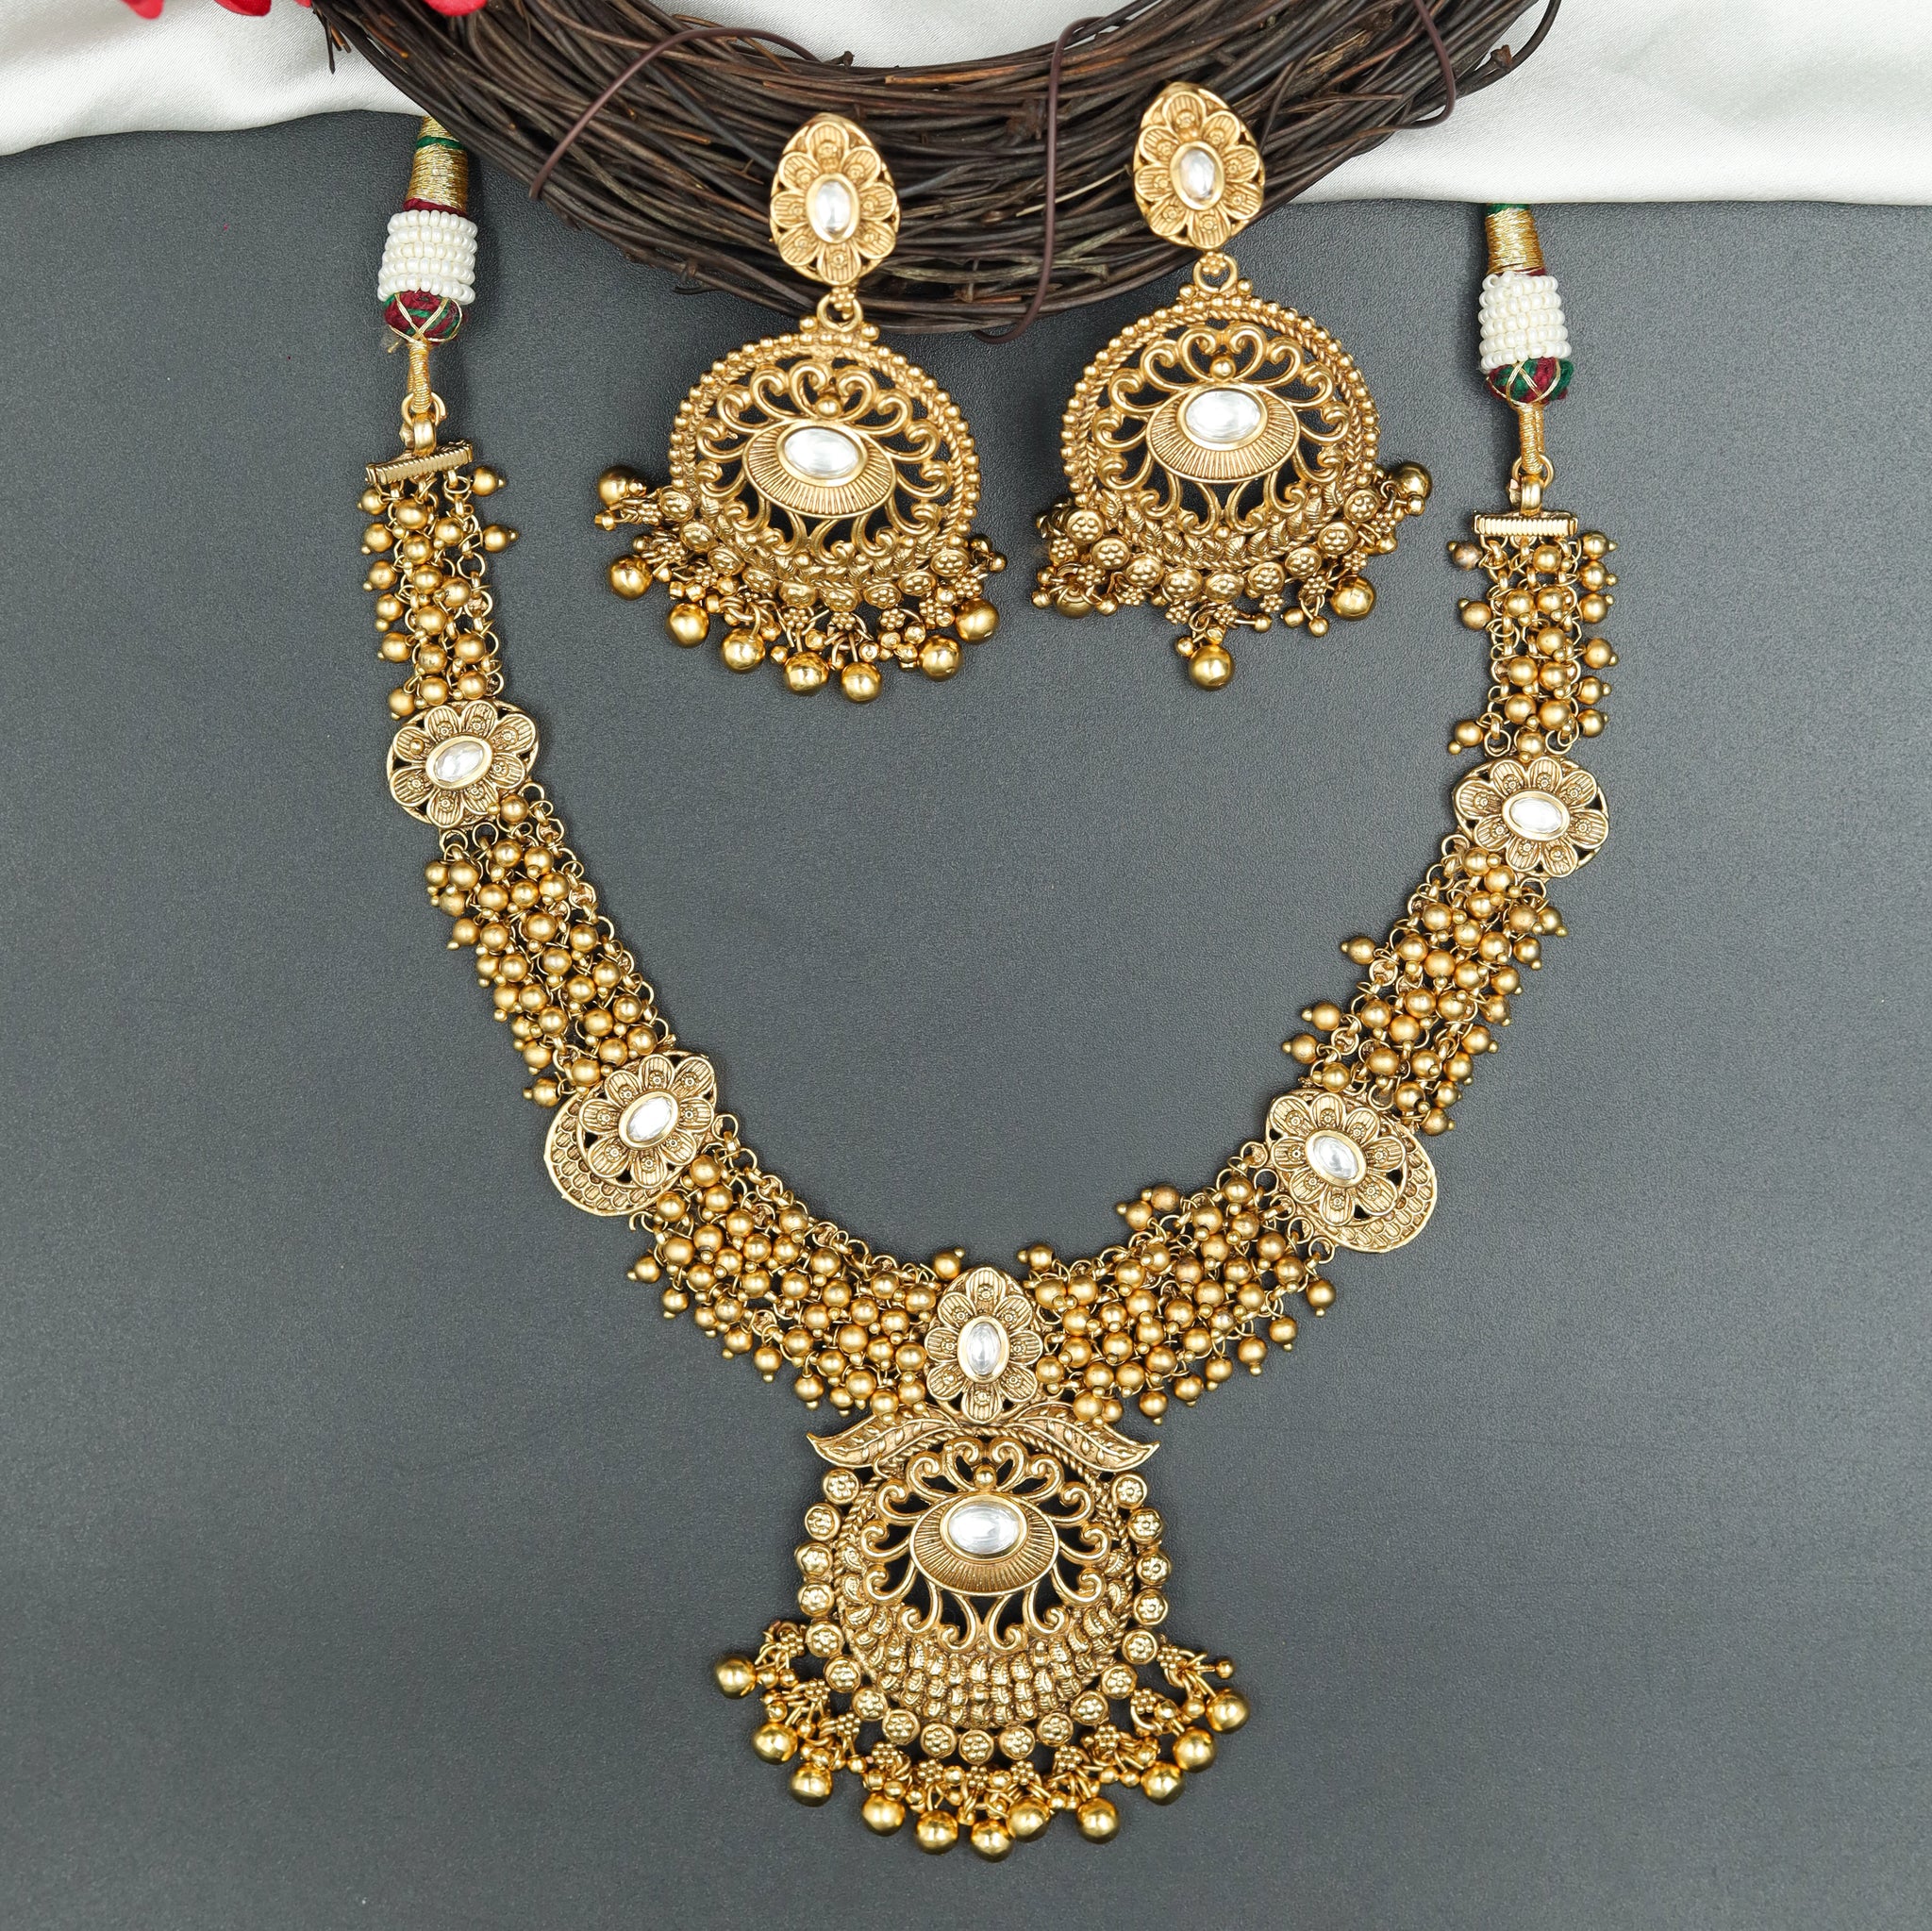 Antique Gold Plated Round Neck Necklace Set 9971-28